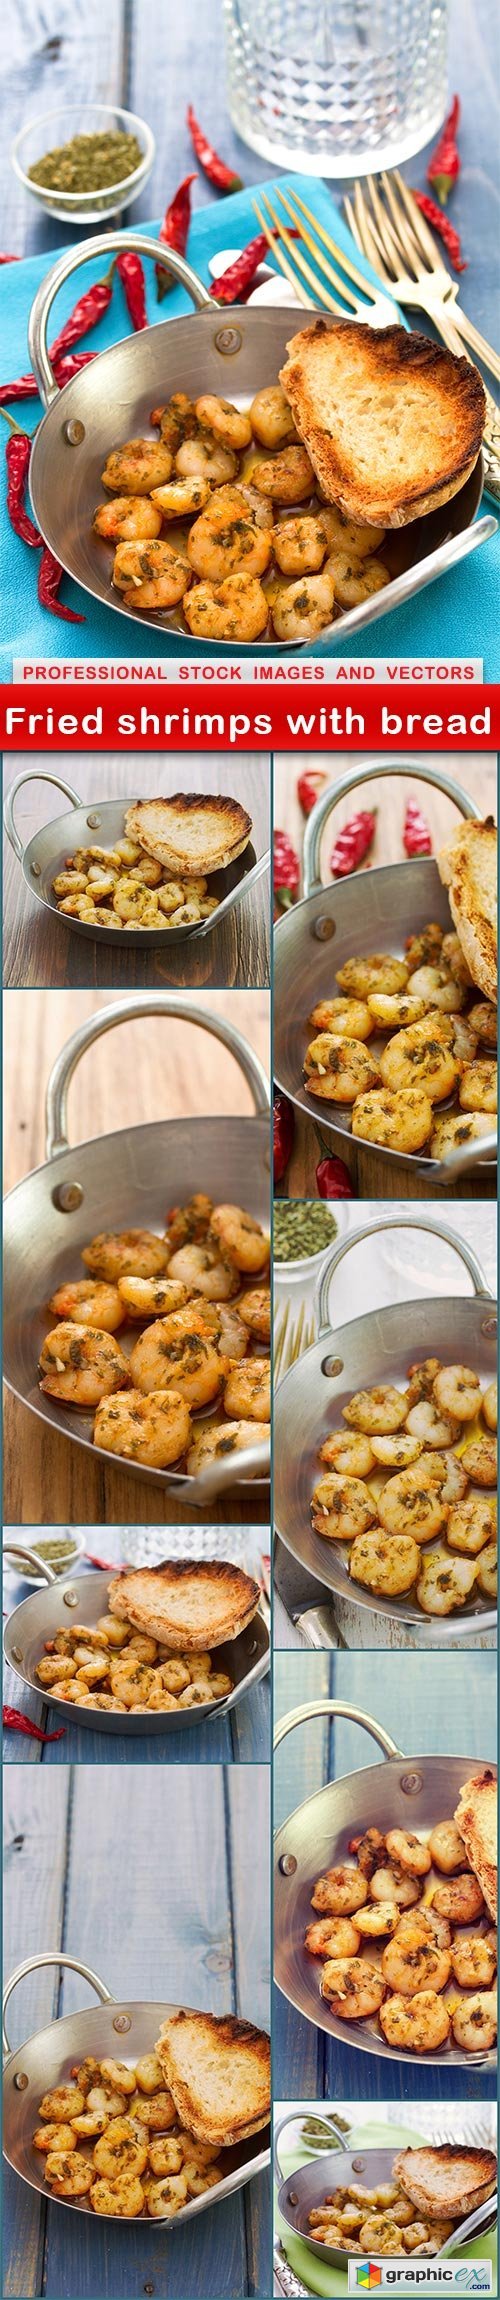 Fried shrimps with bread - 9 UHQ JPEG